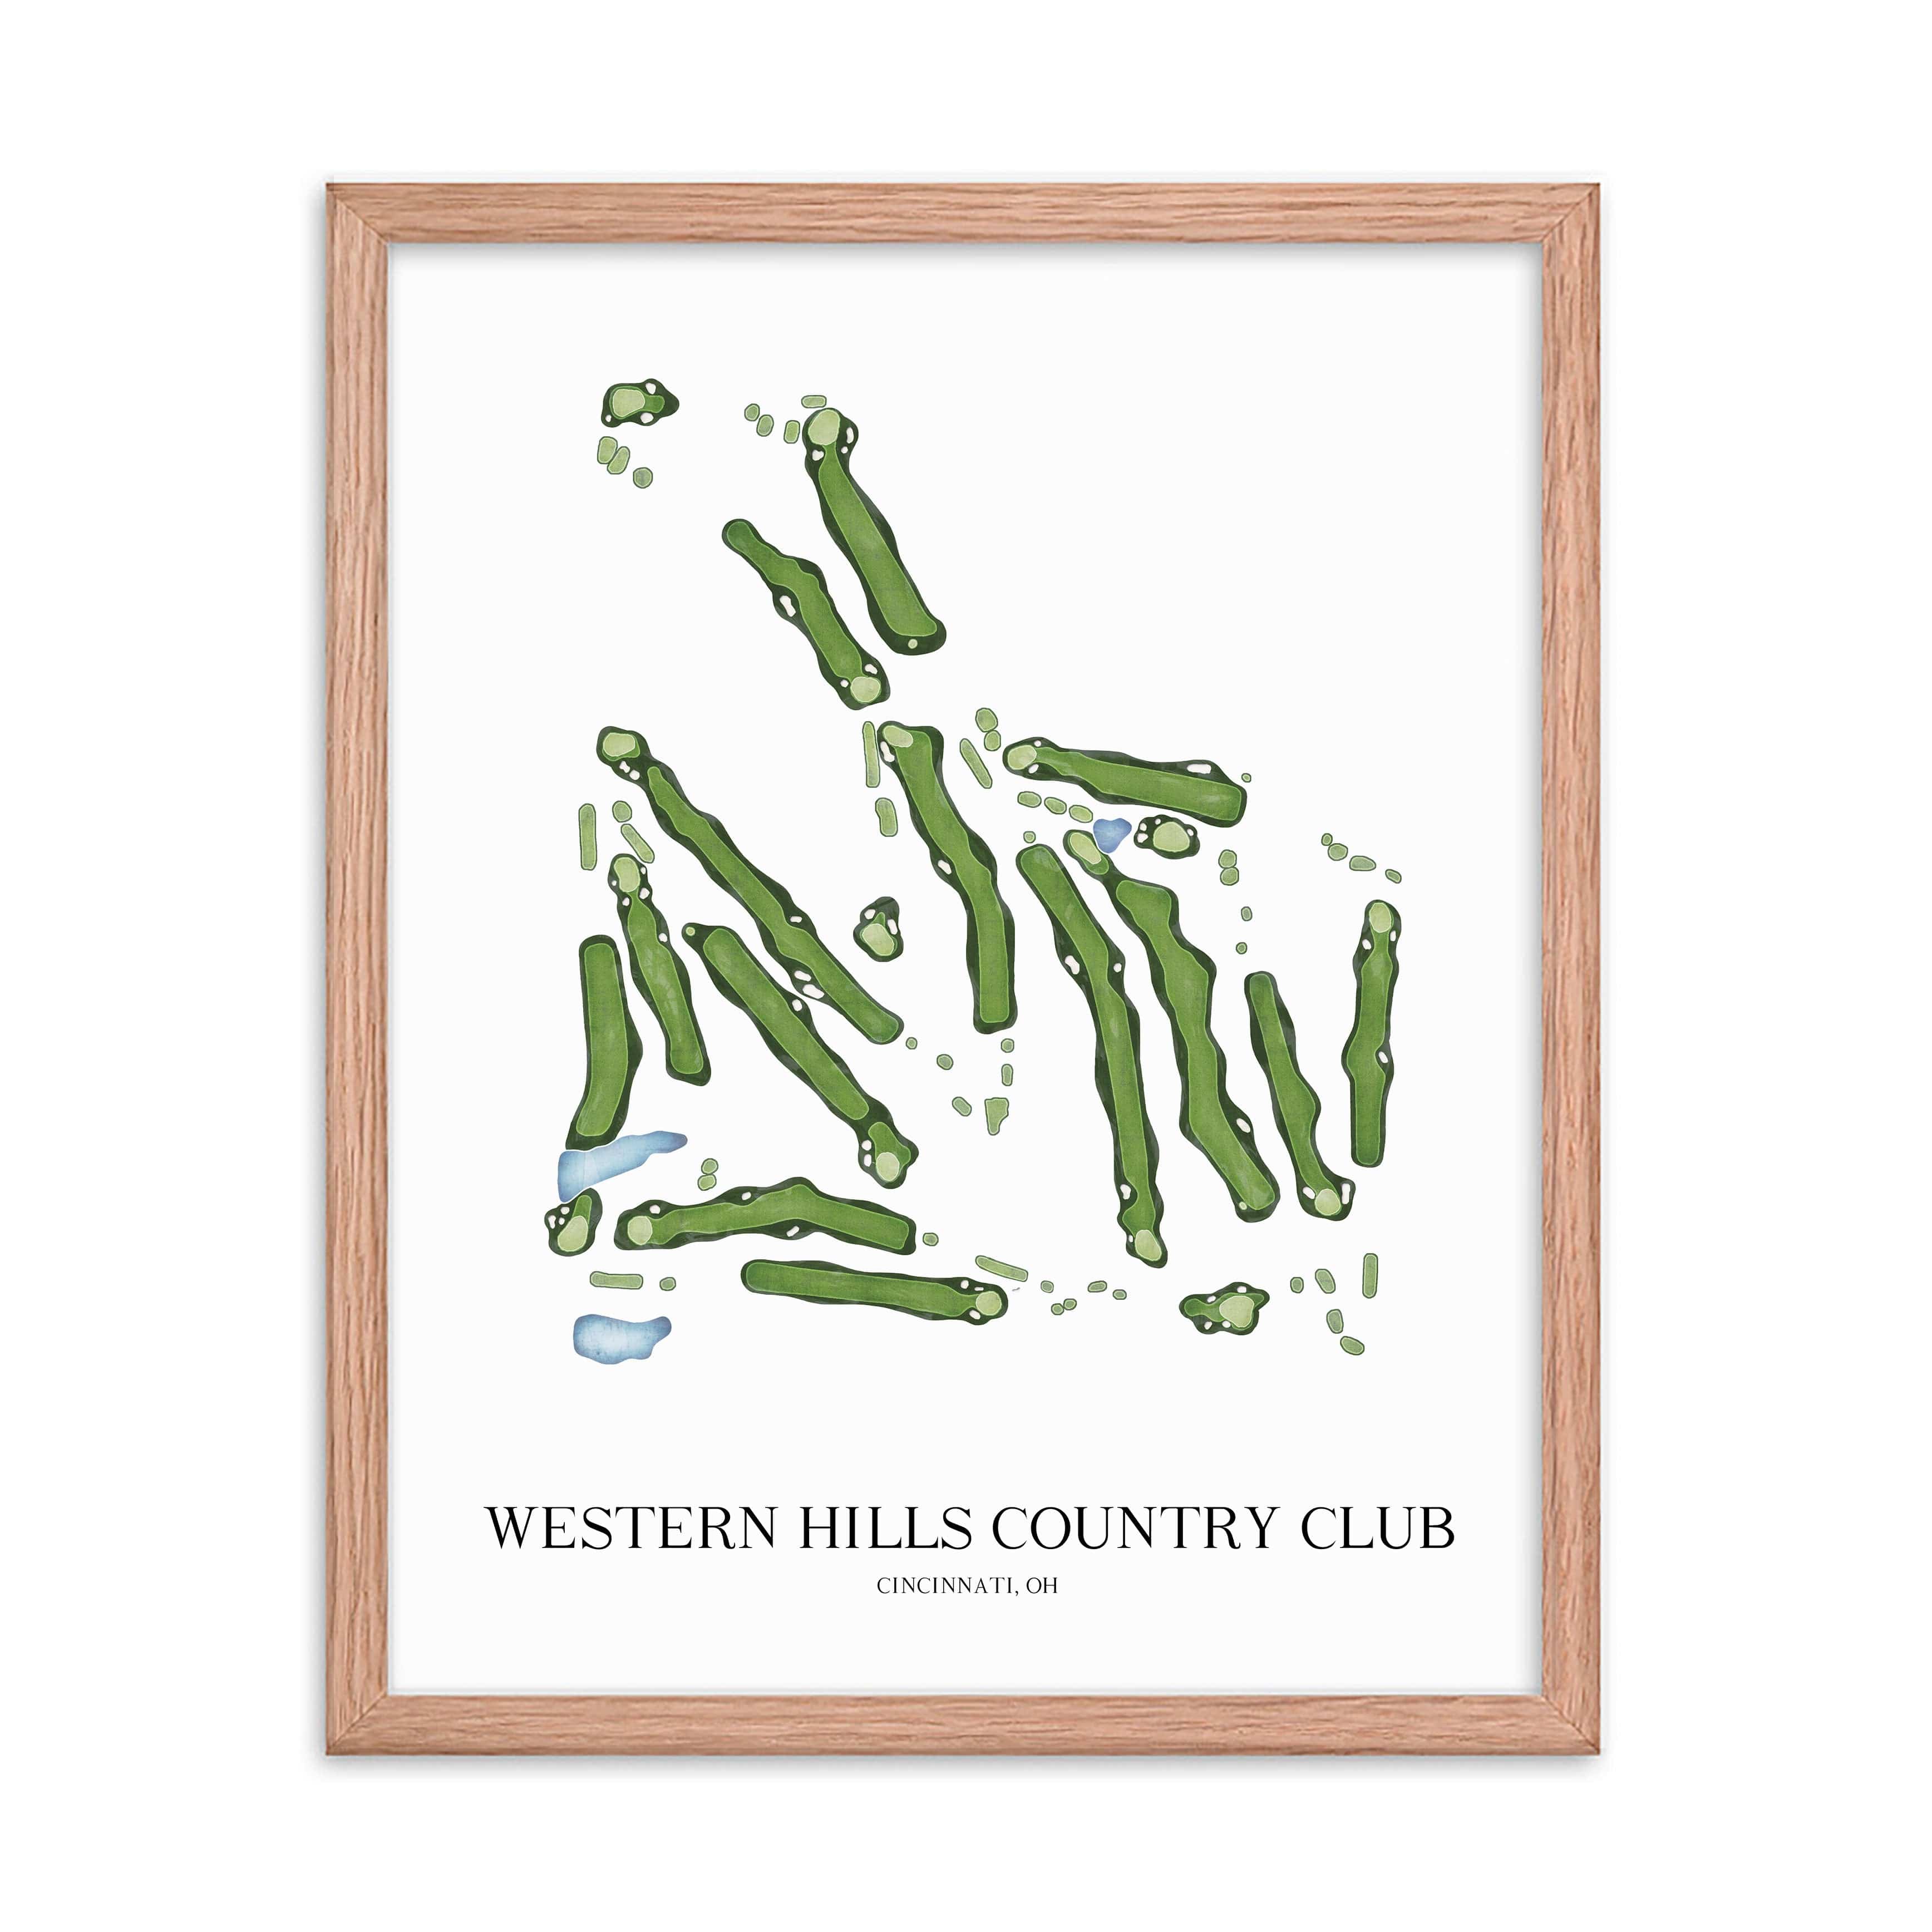 The 19th Hole Golf Shop - Golf Course Prints -  Western Hills Country Club Golf Course Map